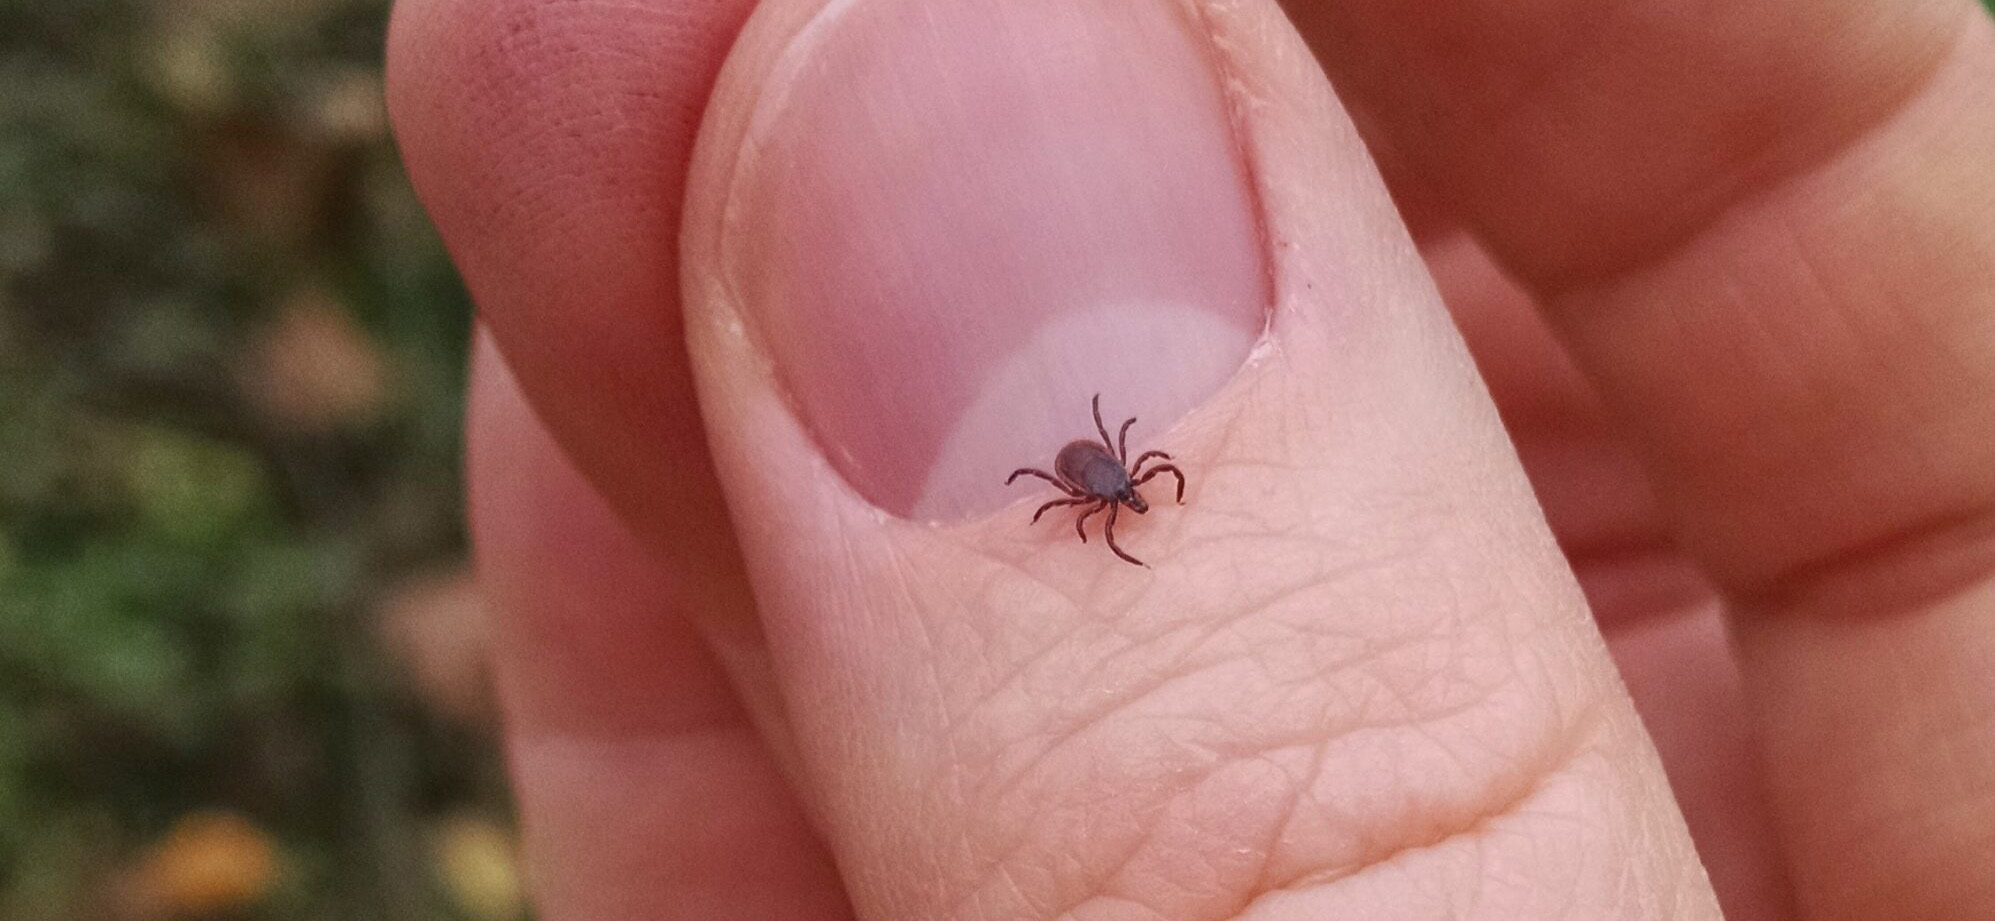 Close-up image of a tick on a human hand, demonstrating the need for reliable pest control services from Pest Me Off.